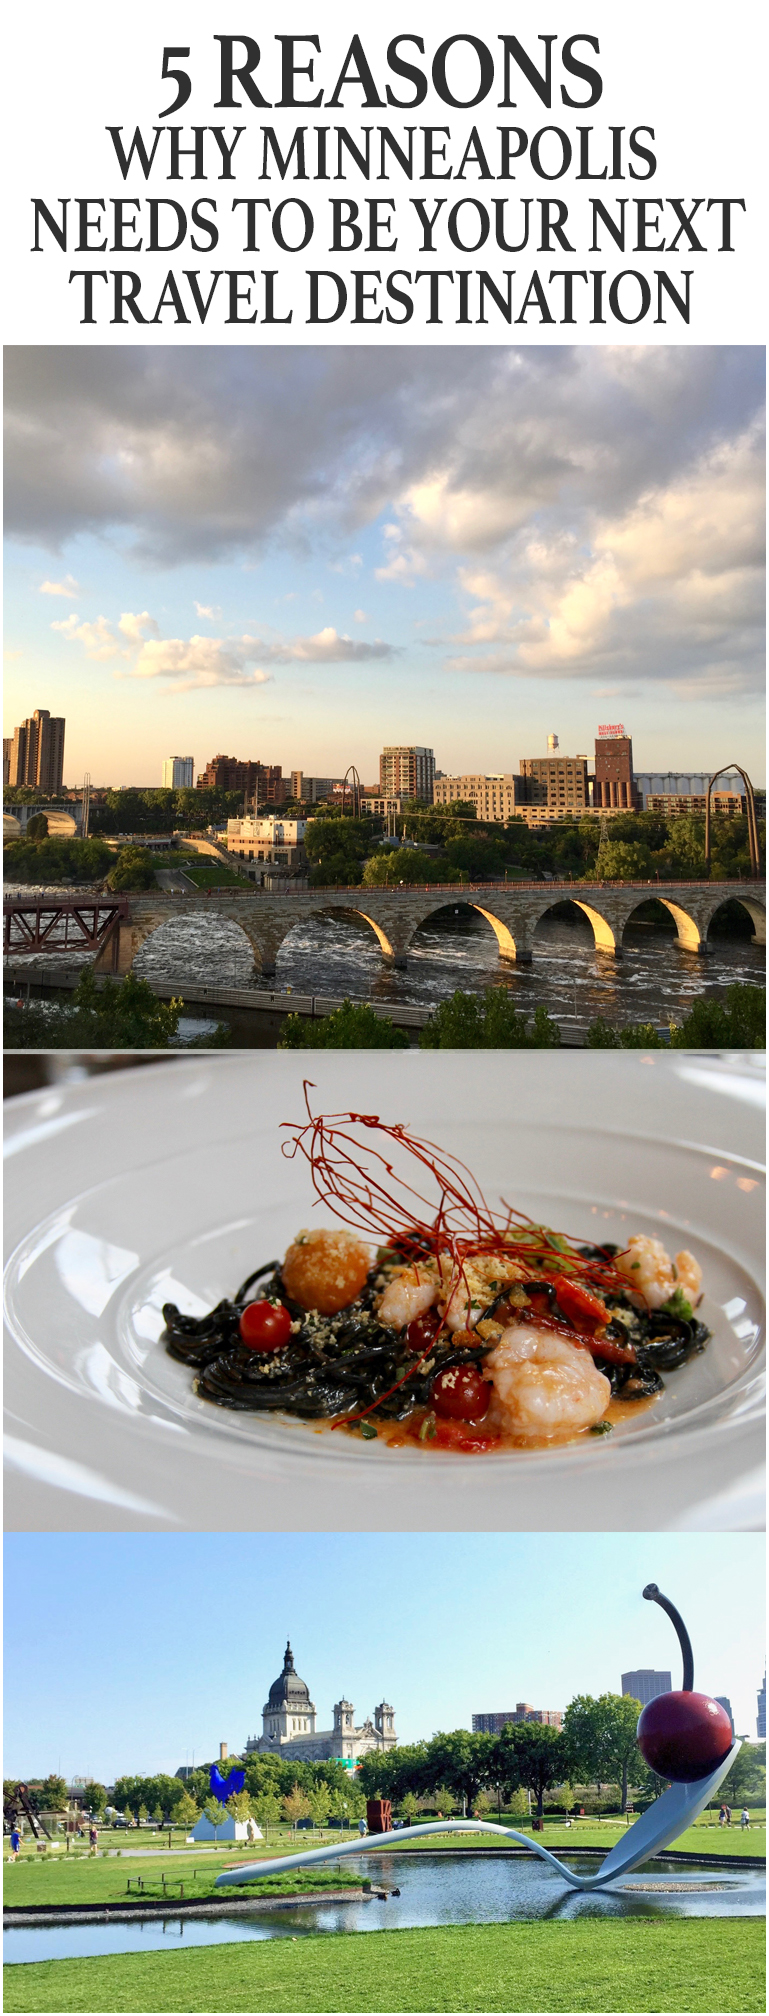 5 reasons why Minneapolis needs to be your next travel destination